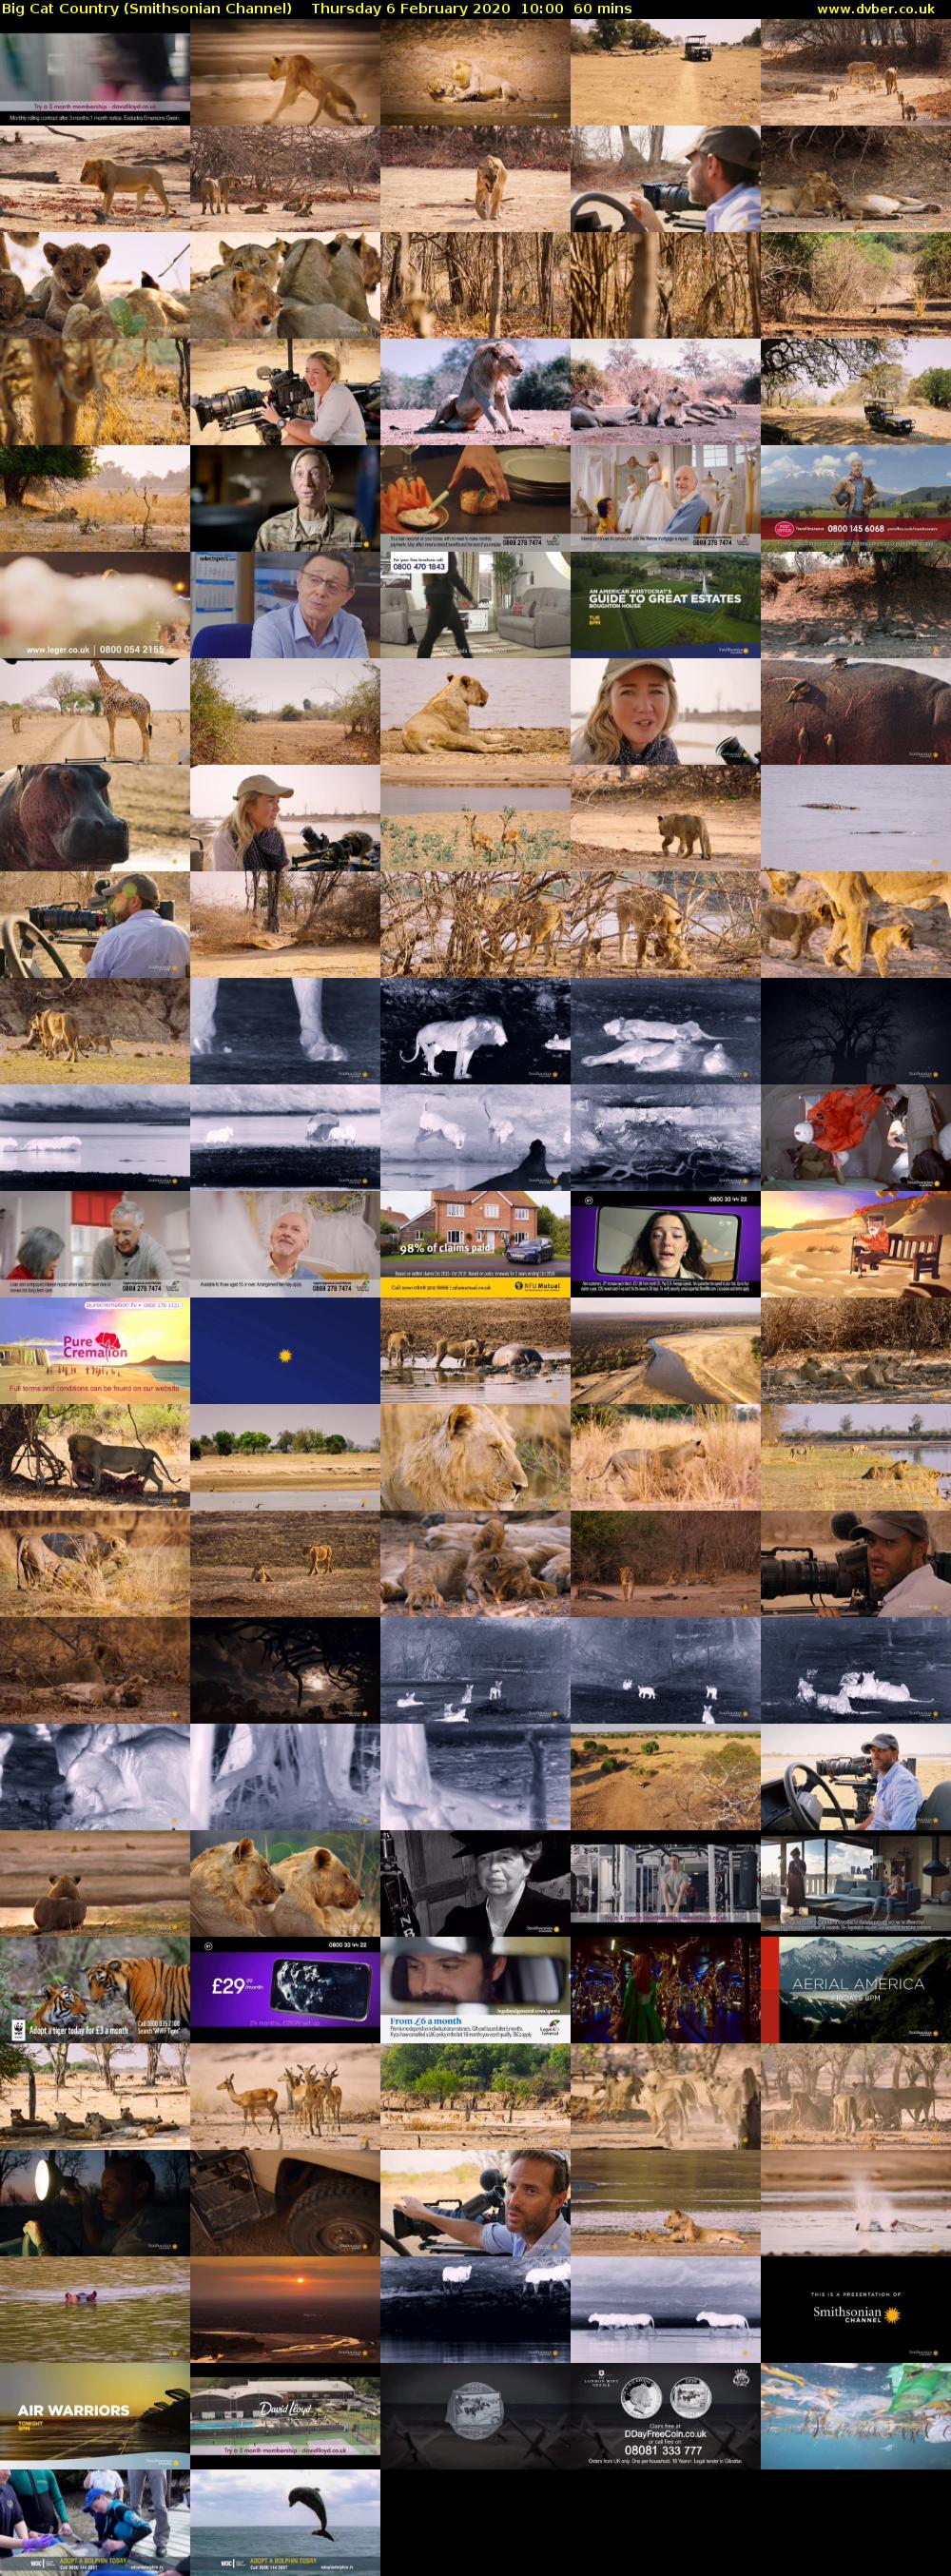 Big Cat Country (Smithsonian Channel) Thursday 6 February 2020 10:00 - 11:00